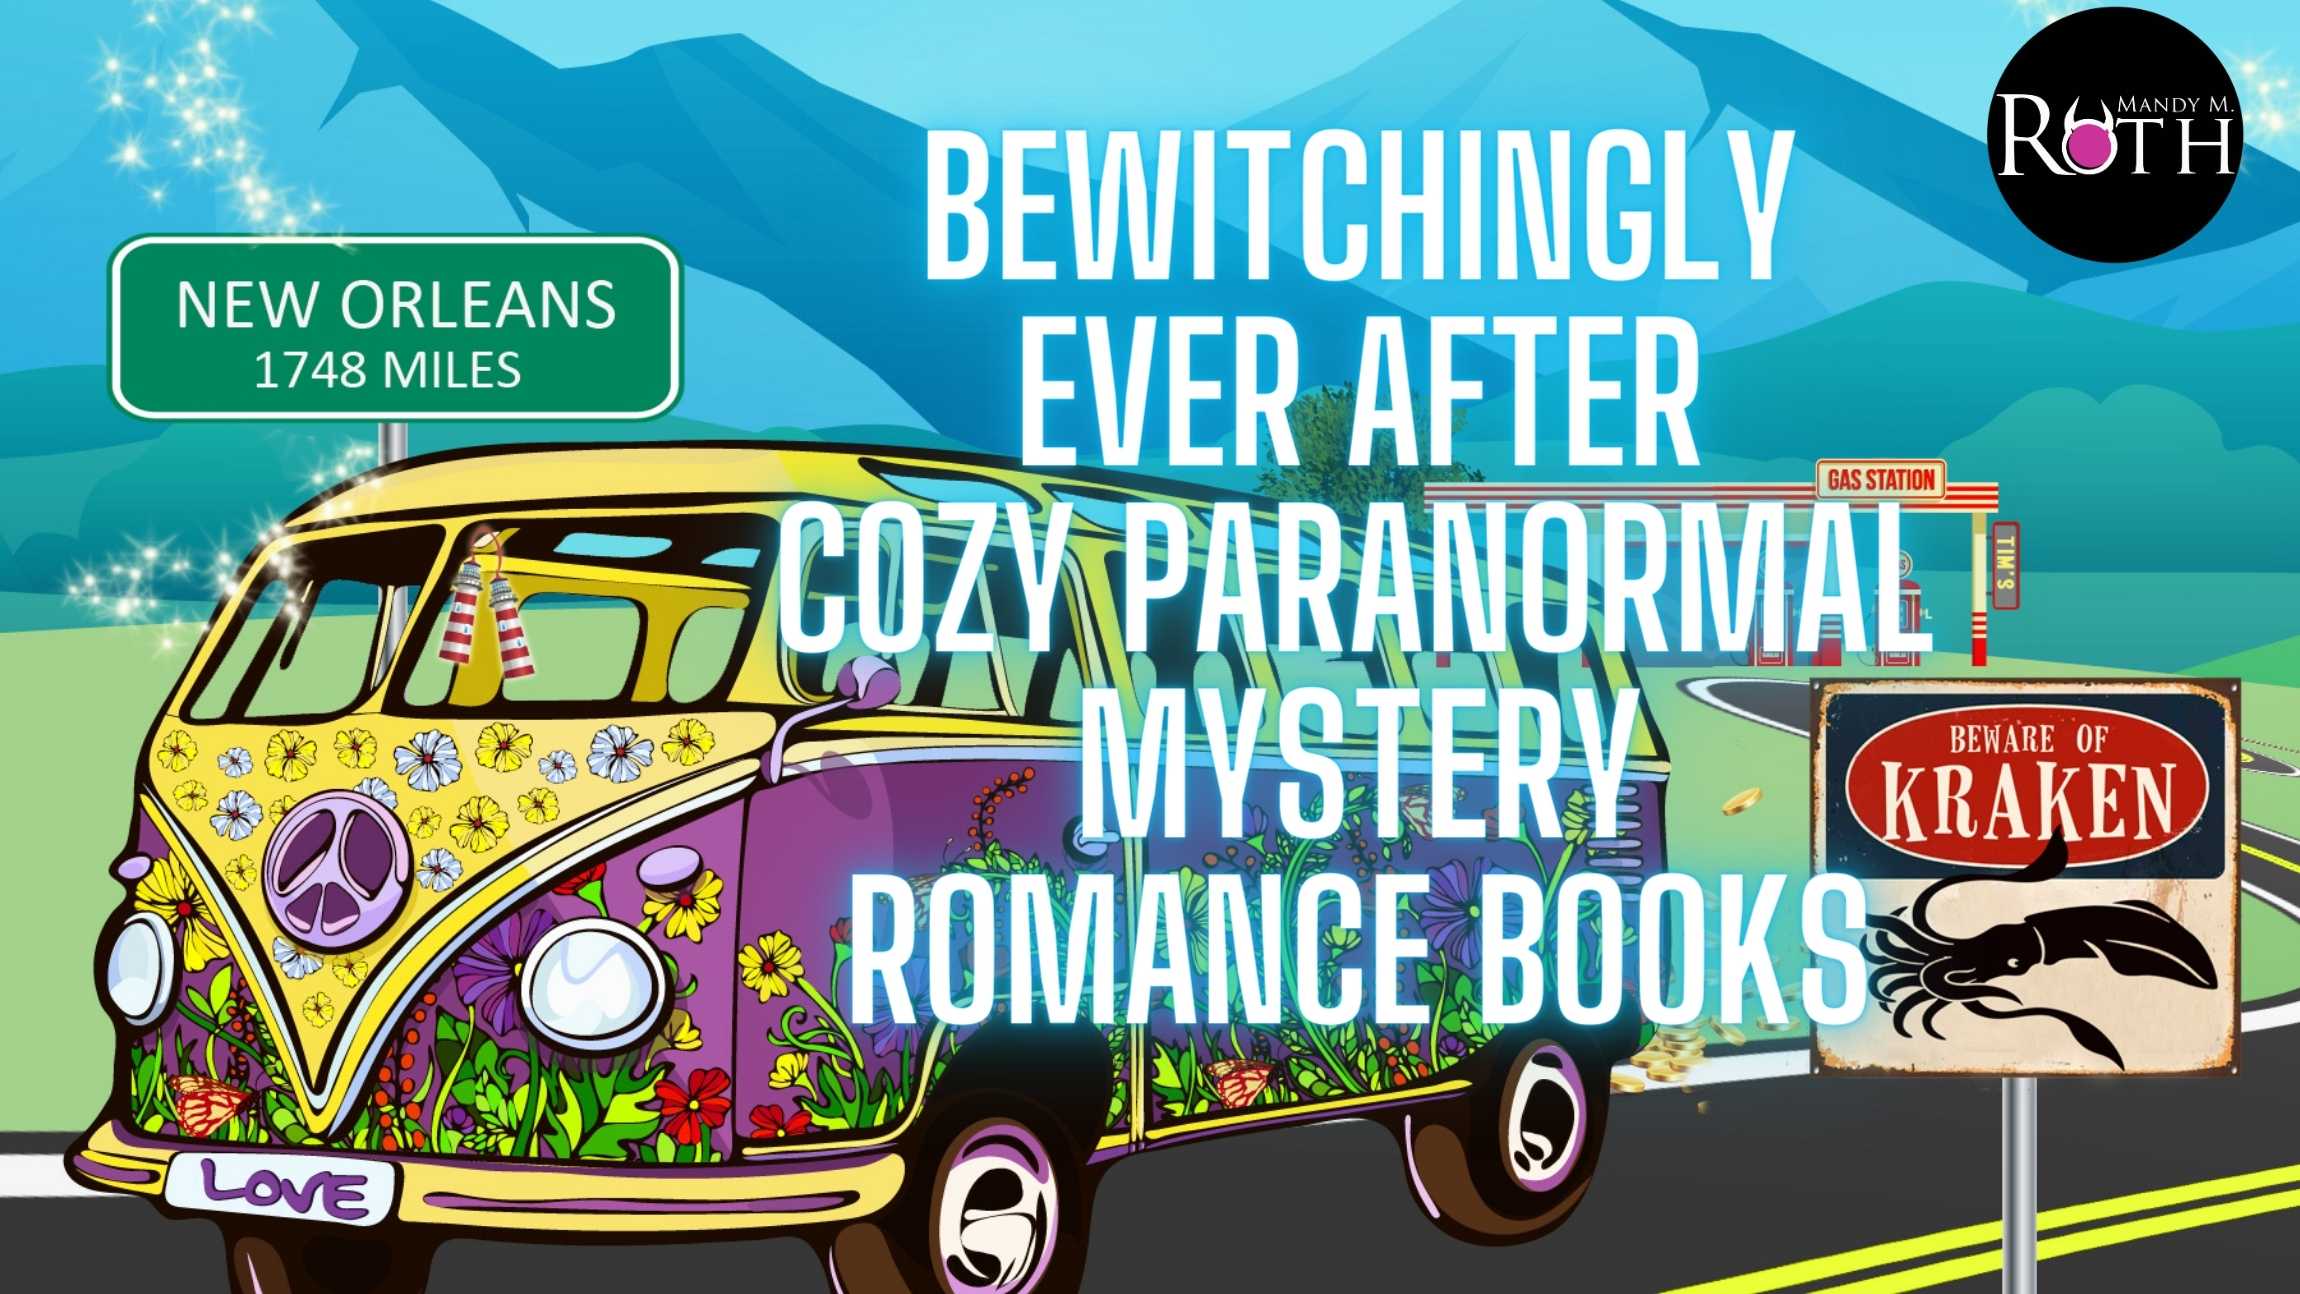 Bewitchingly Ever After Cozy Paranormal mystery ROMANCE Books